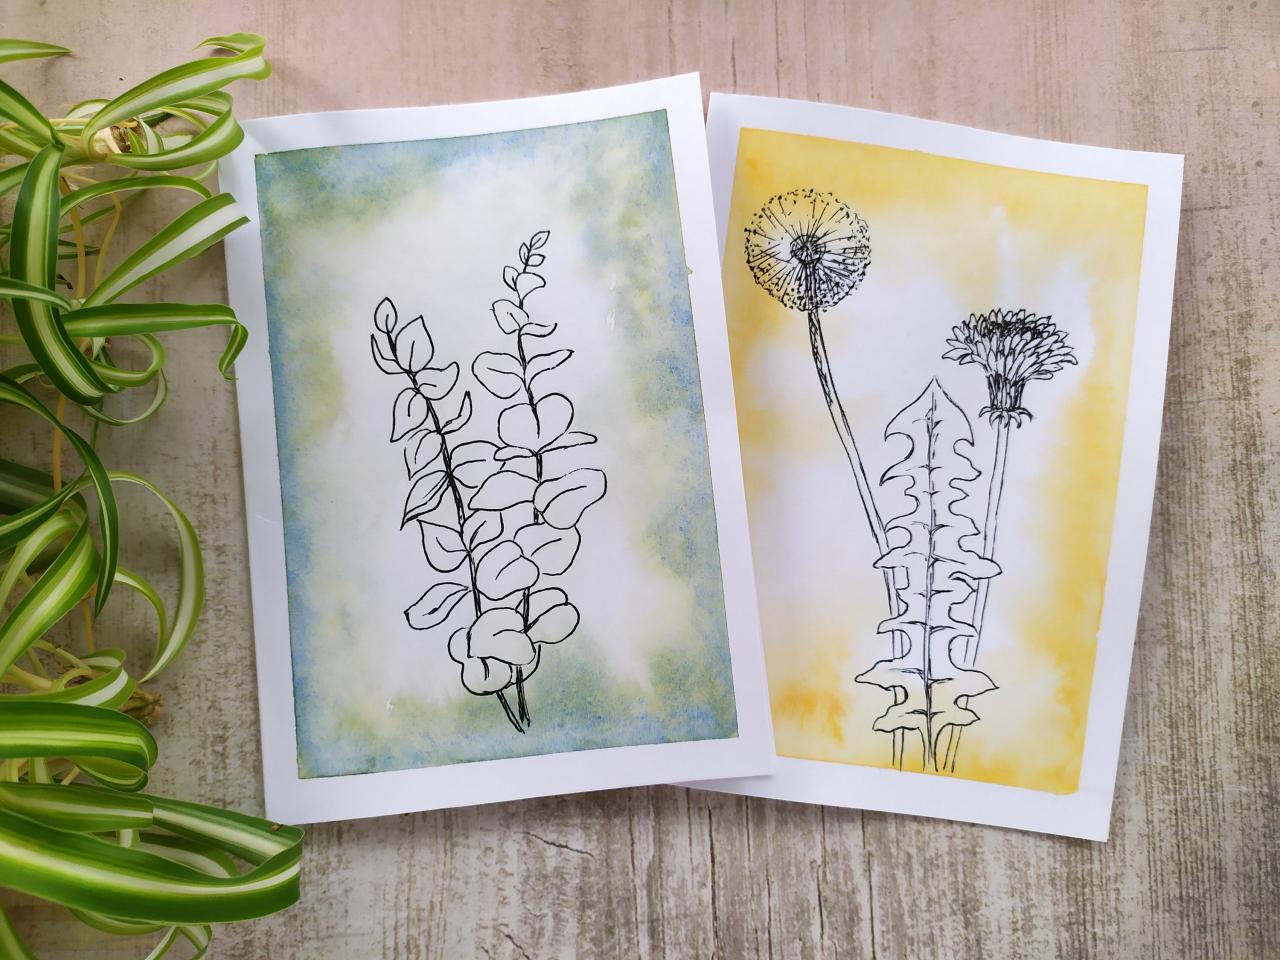 Botanical Watercolor Greeting Card For Her, Gifting Card With Hand-drawn Flower, Friends Green Eucalyptus Yellow Dandelion Birthday Card